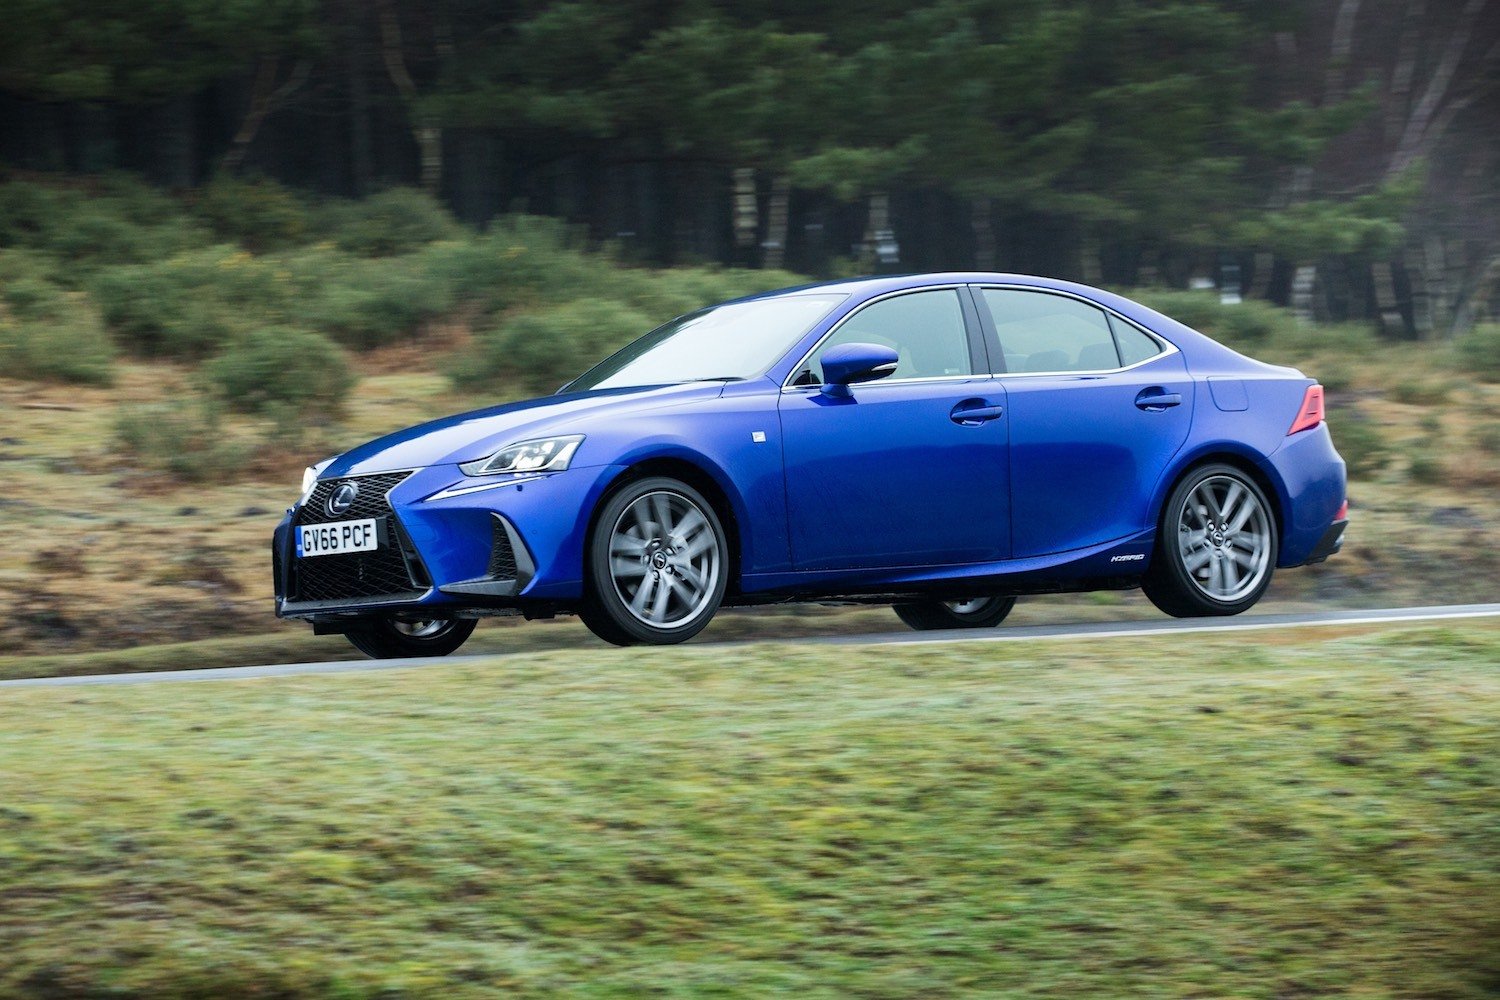 Neil Lyndon reviews the Lexus IS300h for Drive 6